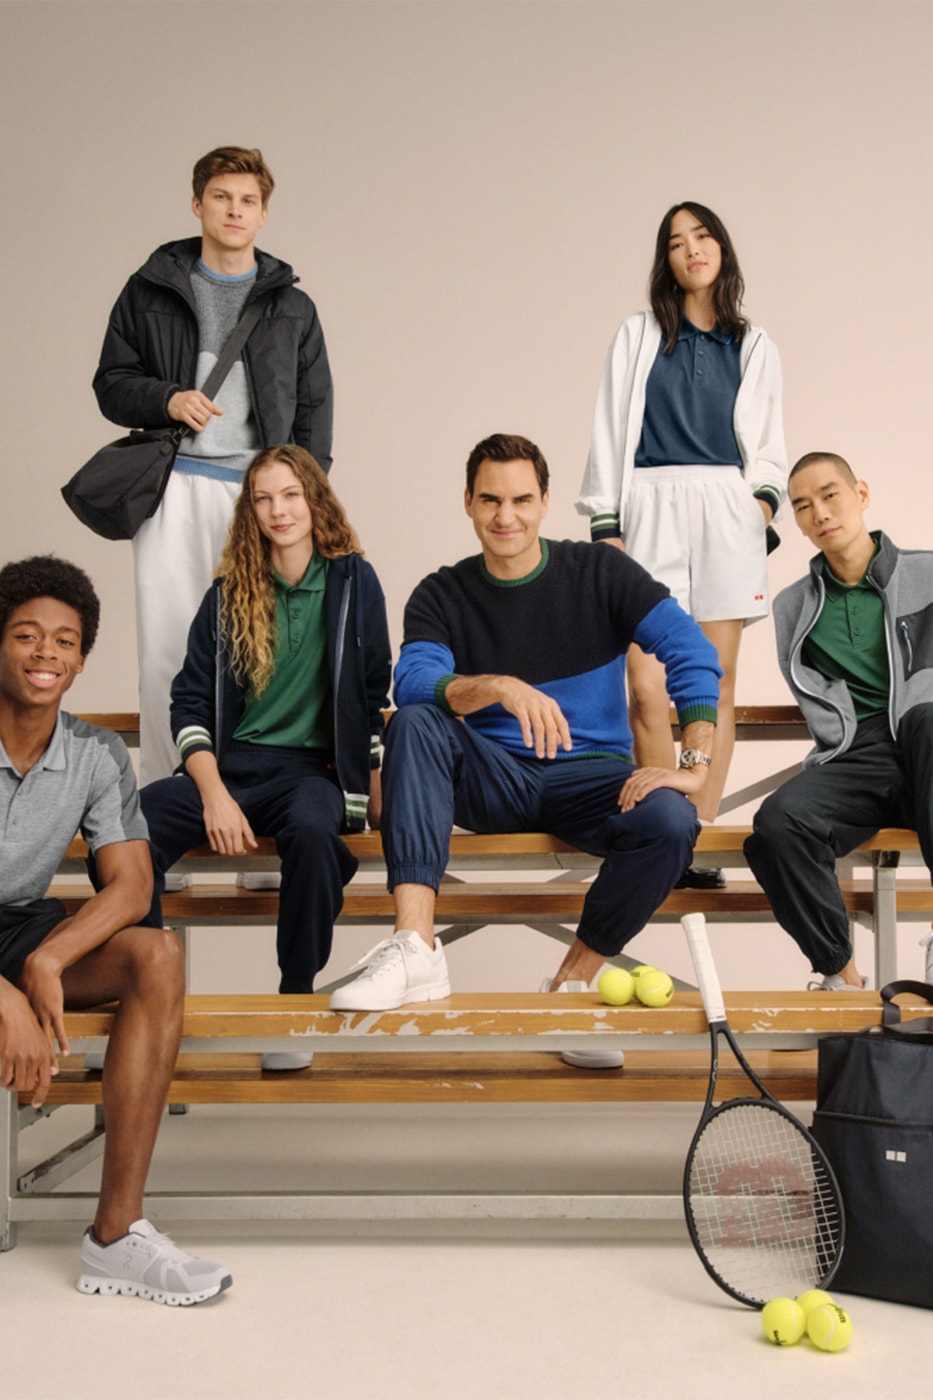 Uniqlo UK x JW Anderson: release date and how to buy new collaboration